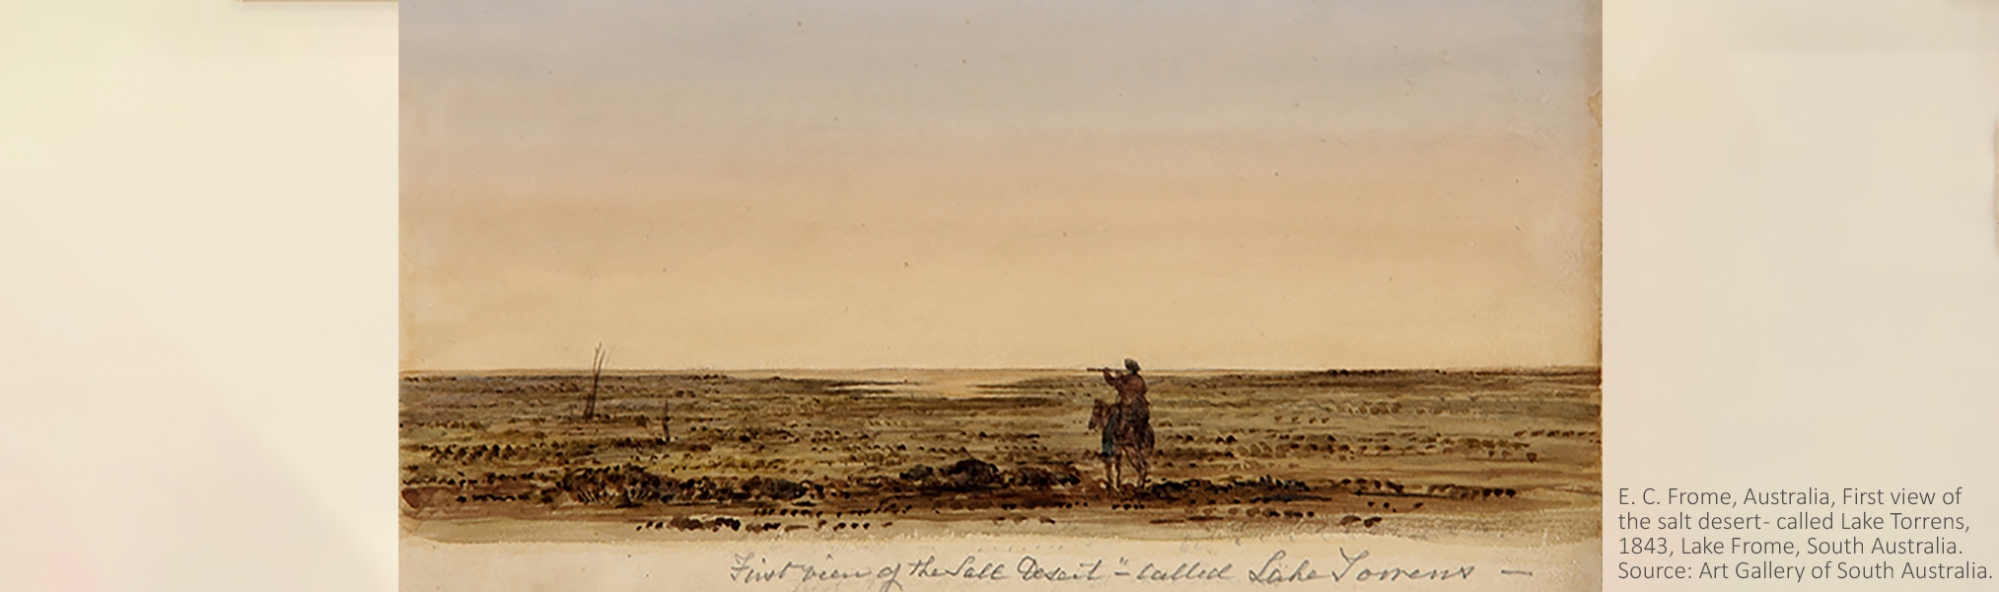 E. C. Frome, Australia, First view of the salt desert - called Lake Torrens, 1843, Lake Frome, South Australia. Source: Art Gallery of South Australia.